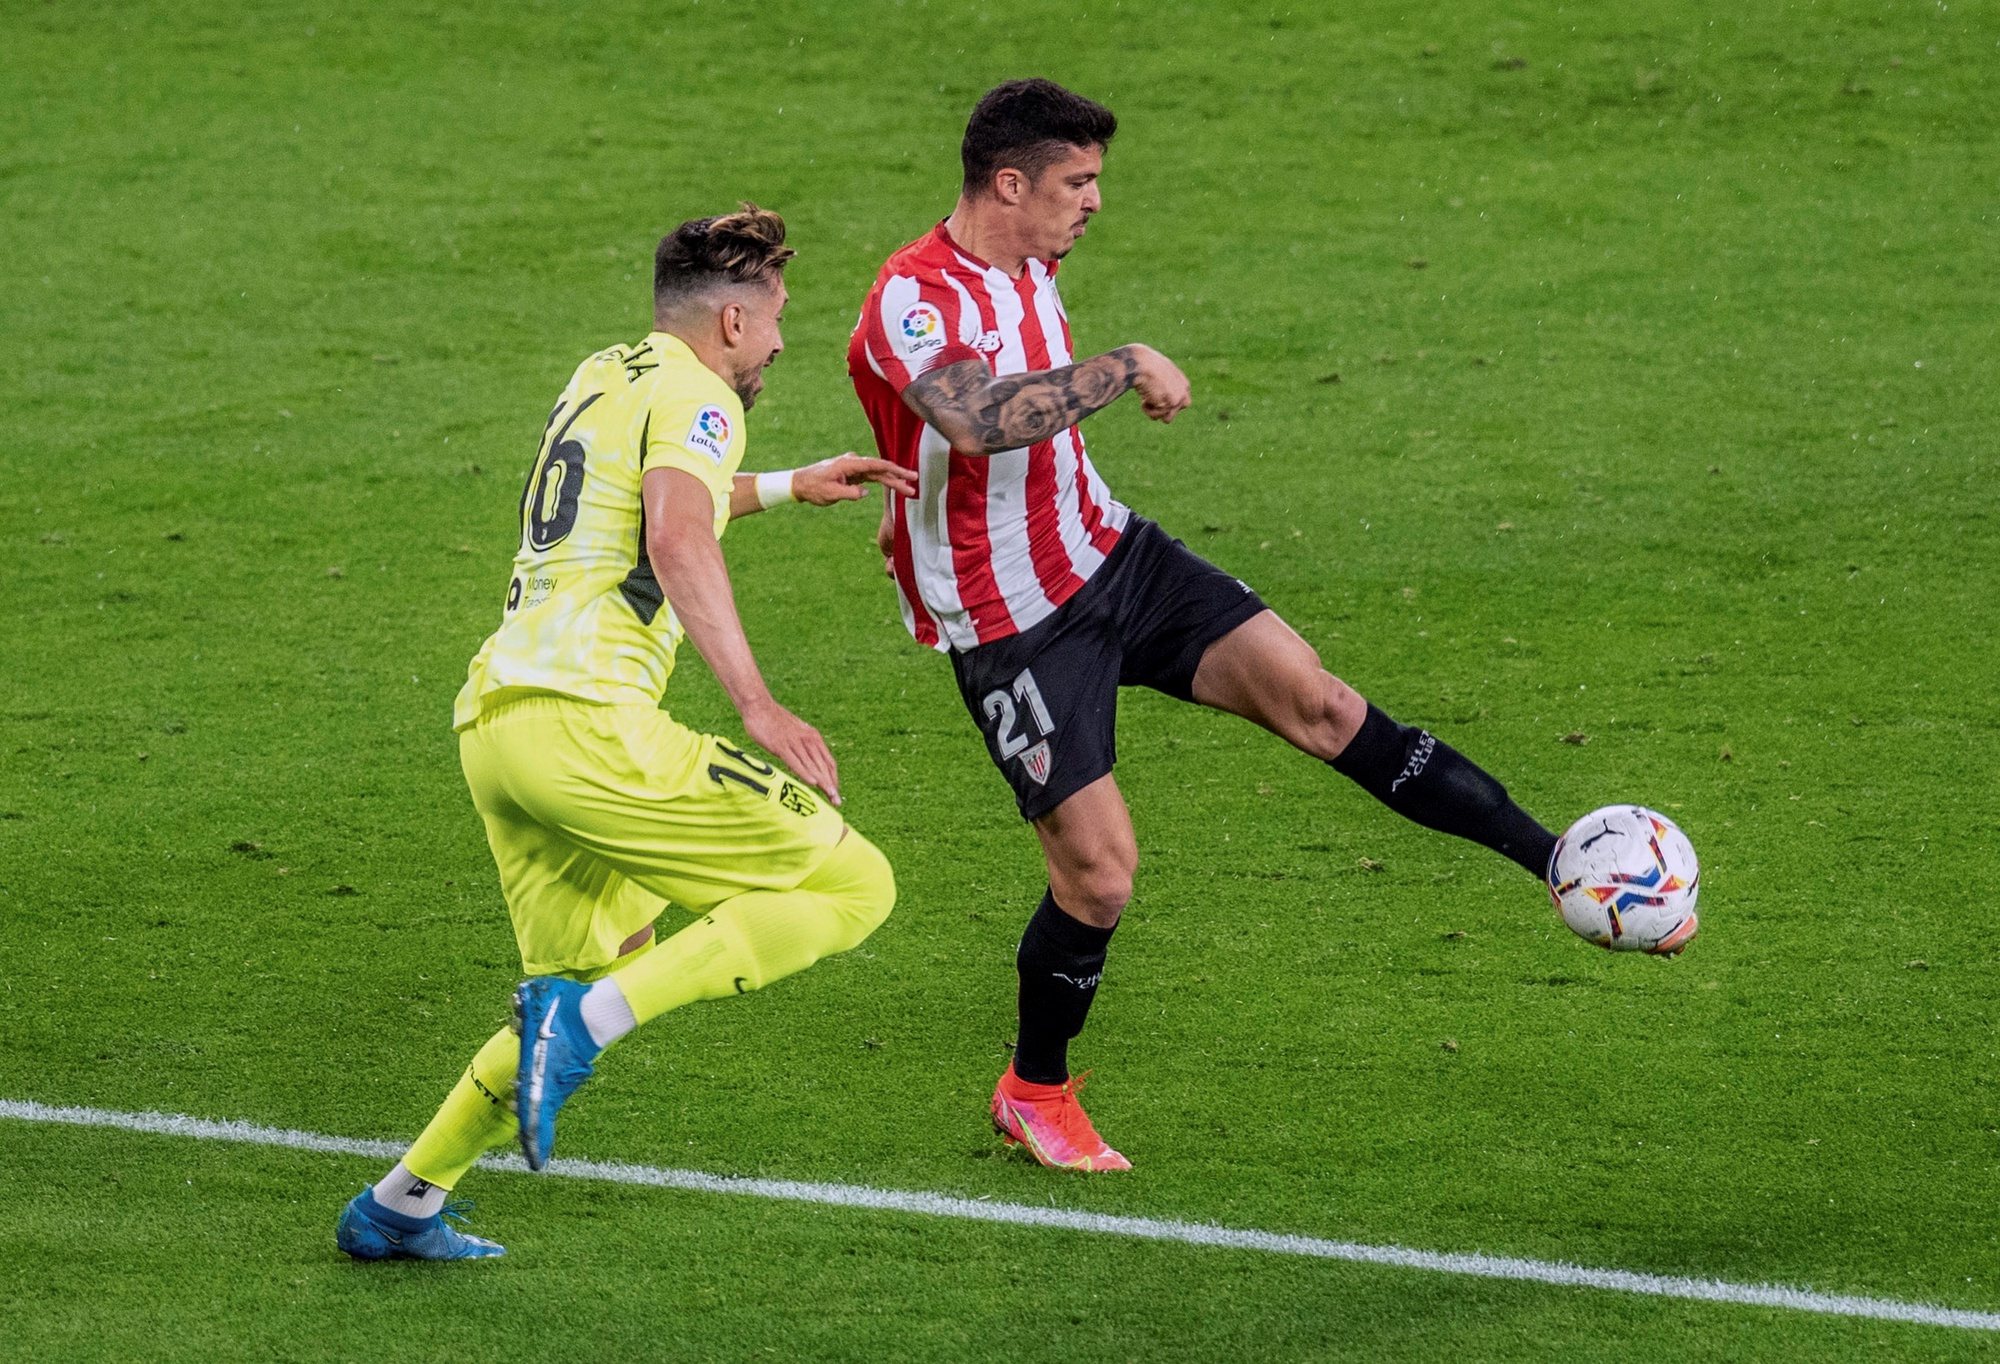 epa09159281 Athletic&#039;s defender Ander Capa (R) vies for the ball against Atletico&#039;s Mexican midfielder Hector Herrera (L) during the Spanish LaLiga soccer match between Athletic Club and Atletico de Madrid at San Mames stadium in Bilbao, Basque Country, Spain, 25 April 2021.  EPA/Javier Zorrilla